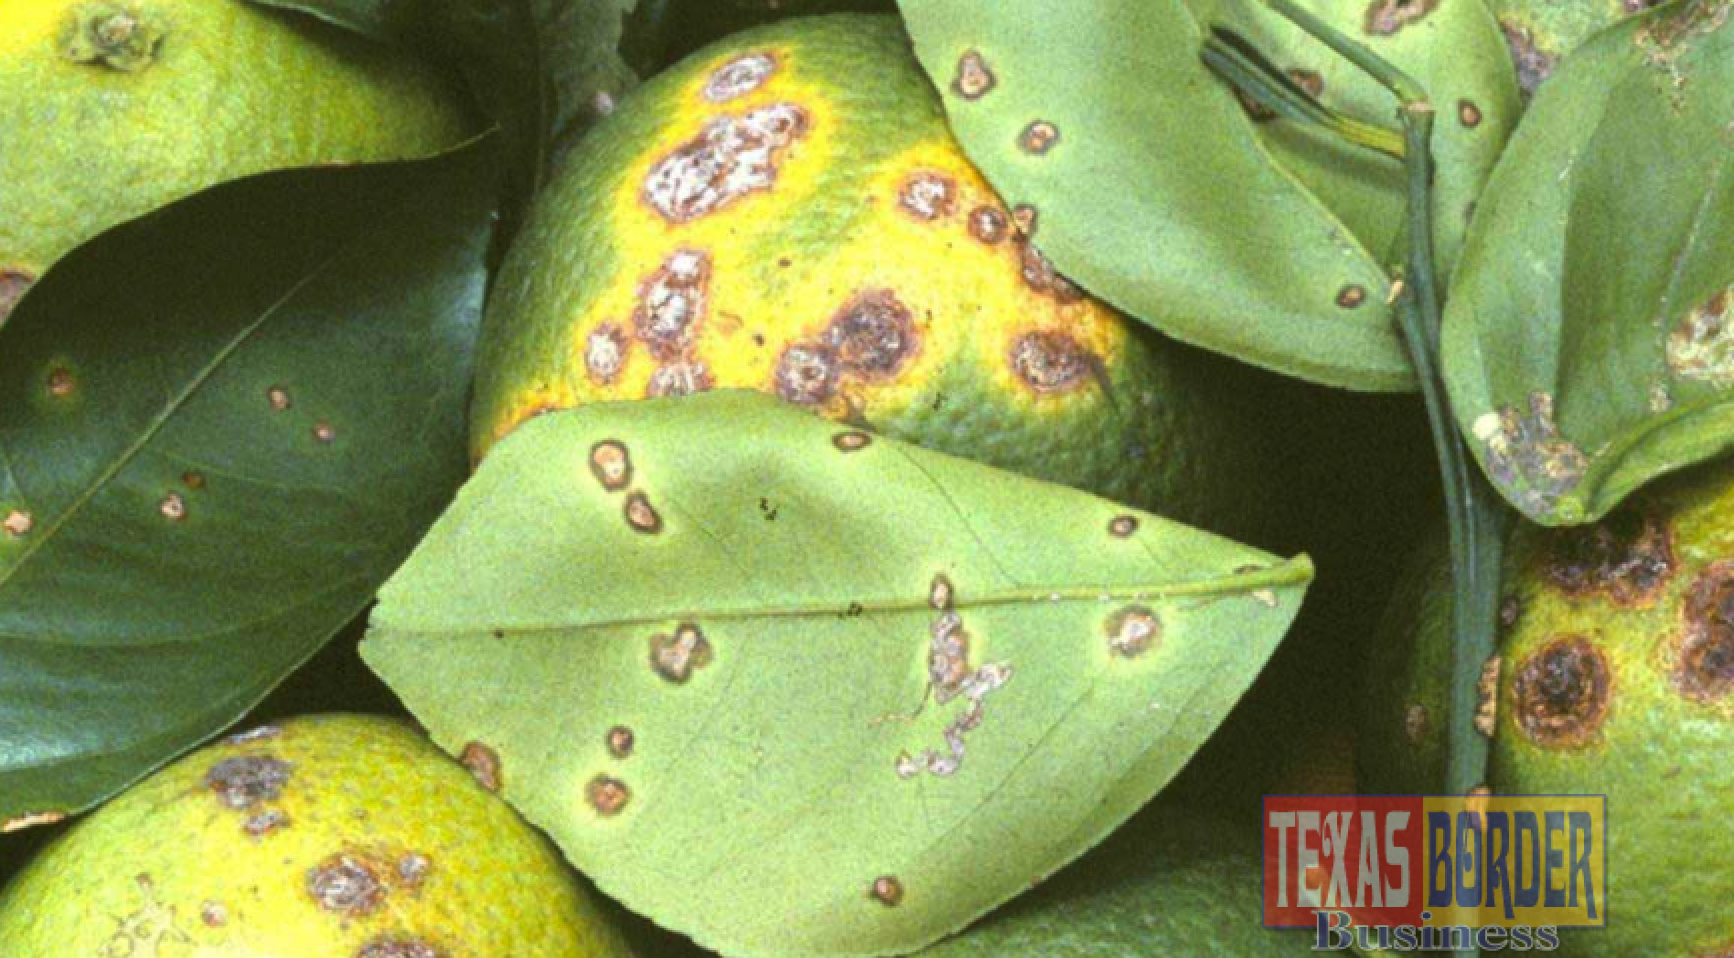 Citrus canker is mostly a leaf-spotting and fruit rind blemishing disease, but when conditions are highly favorable for infection, infections cause defoliation, shoot dieback and fruit drop.